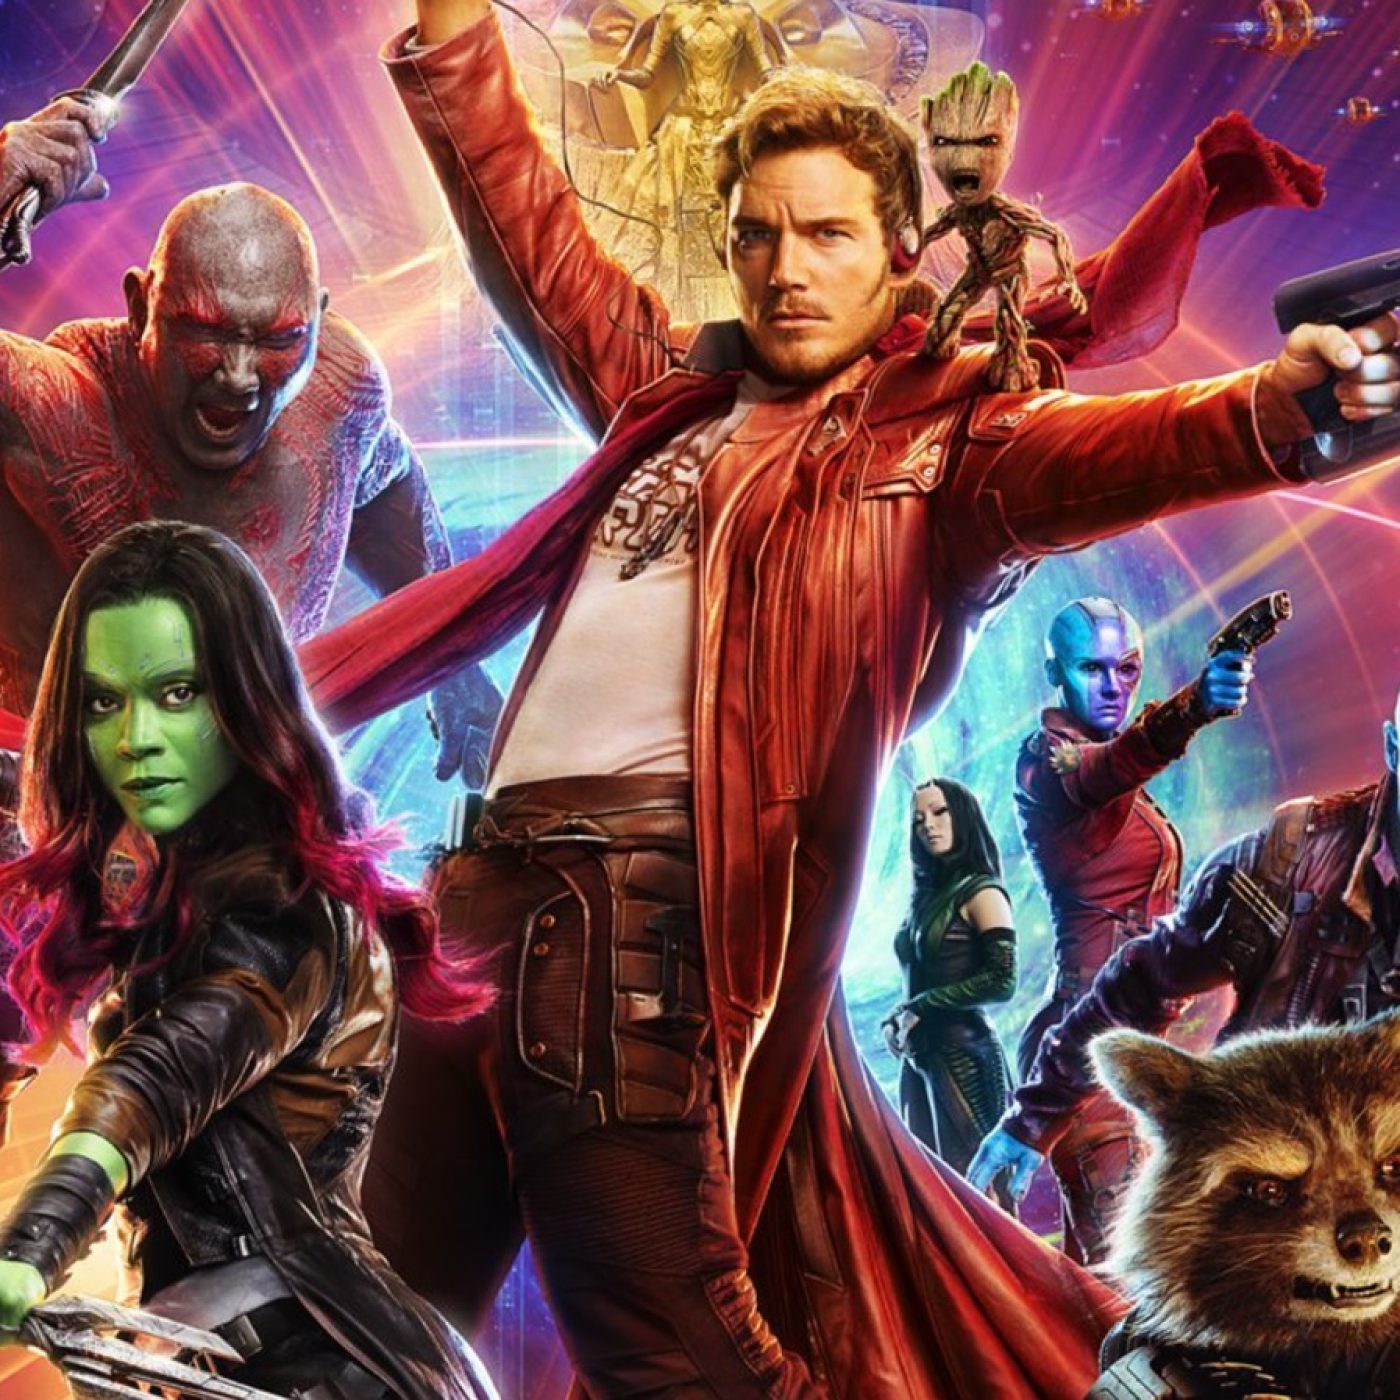 Guardians' Vs. 'Avengers': 'Vol. 2' Could Top 'Age of Ultron' on